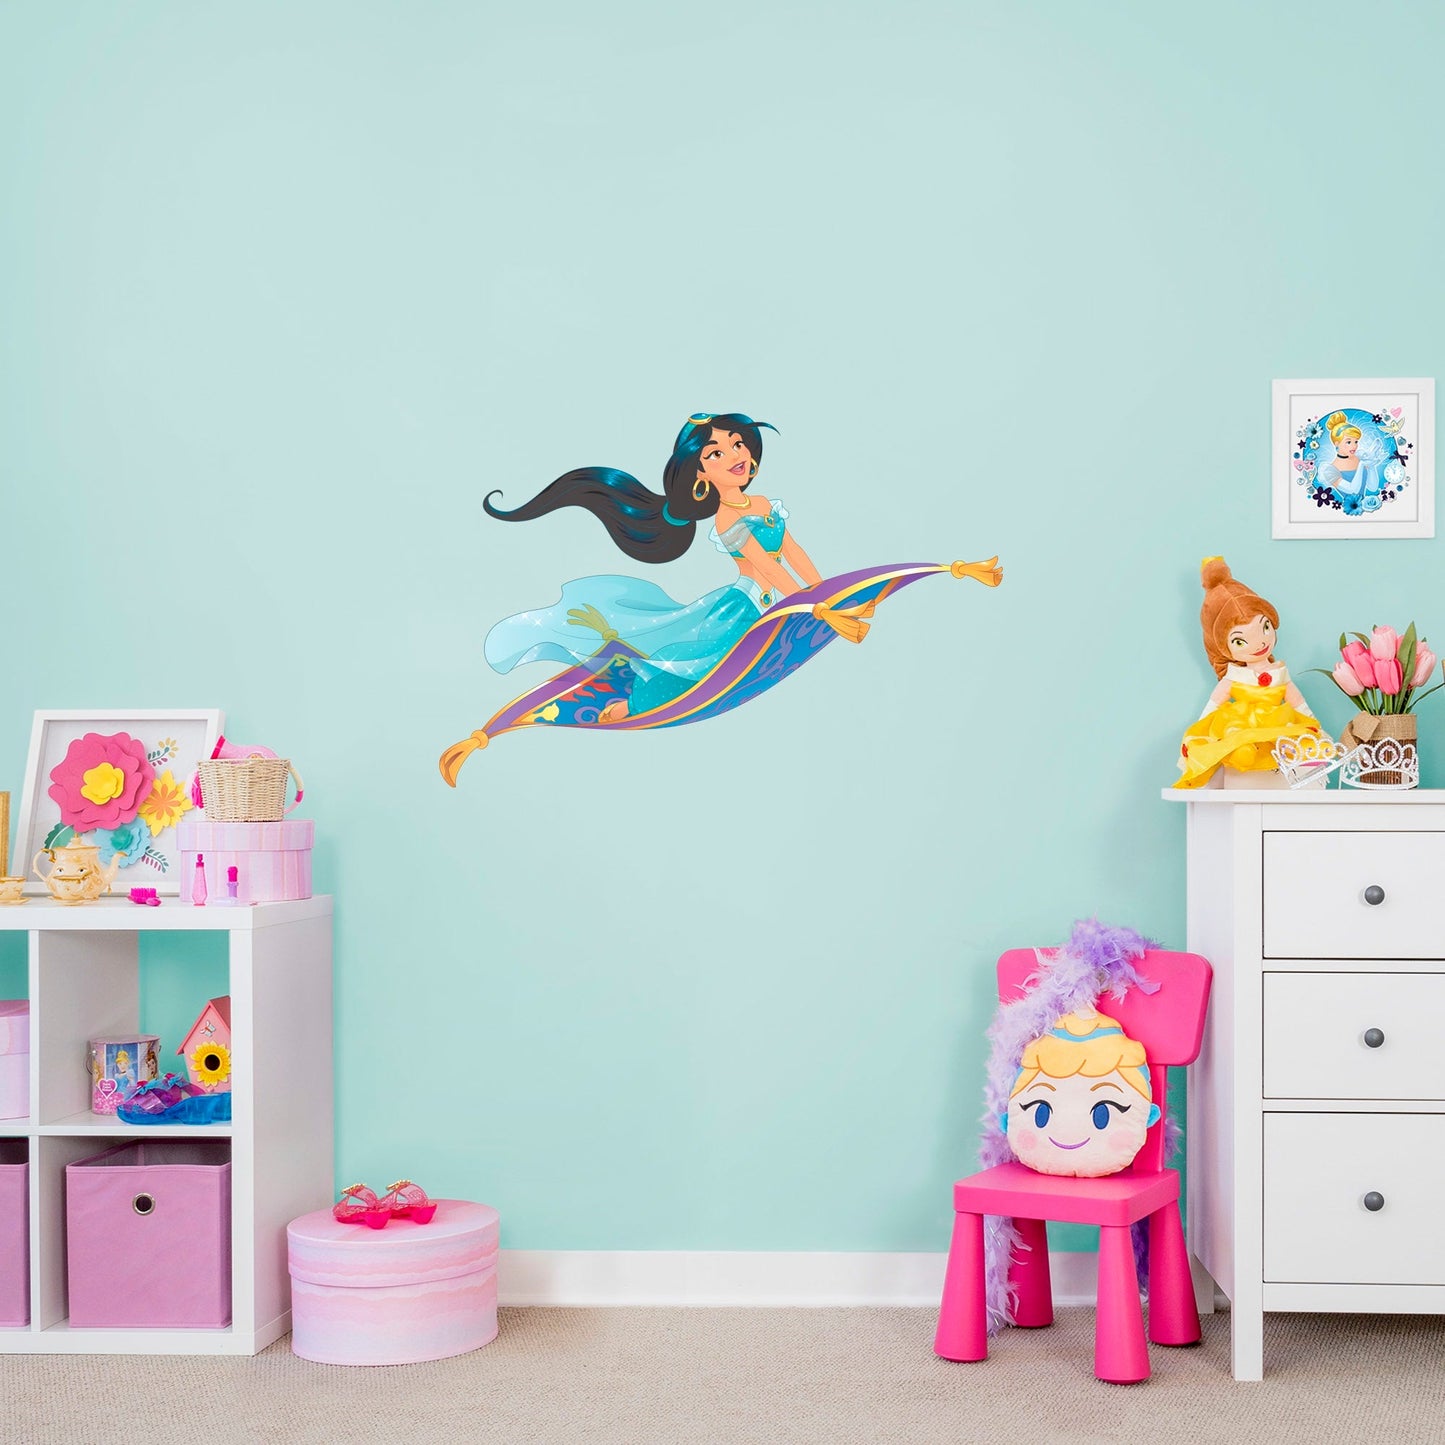 Jasmine: Flying Carpet Ride - Officially Licensed Disney Removable Wall Decal